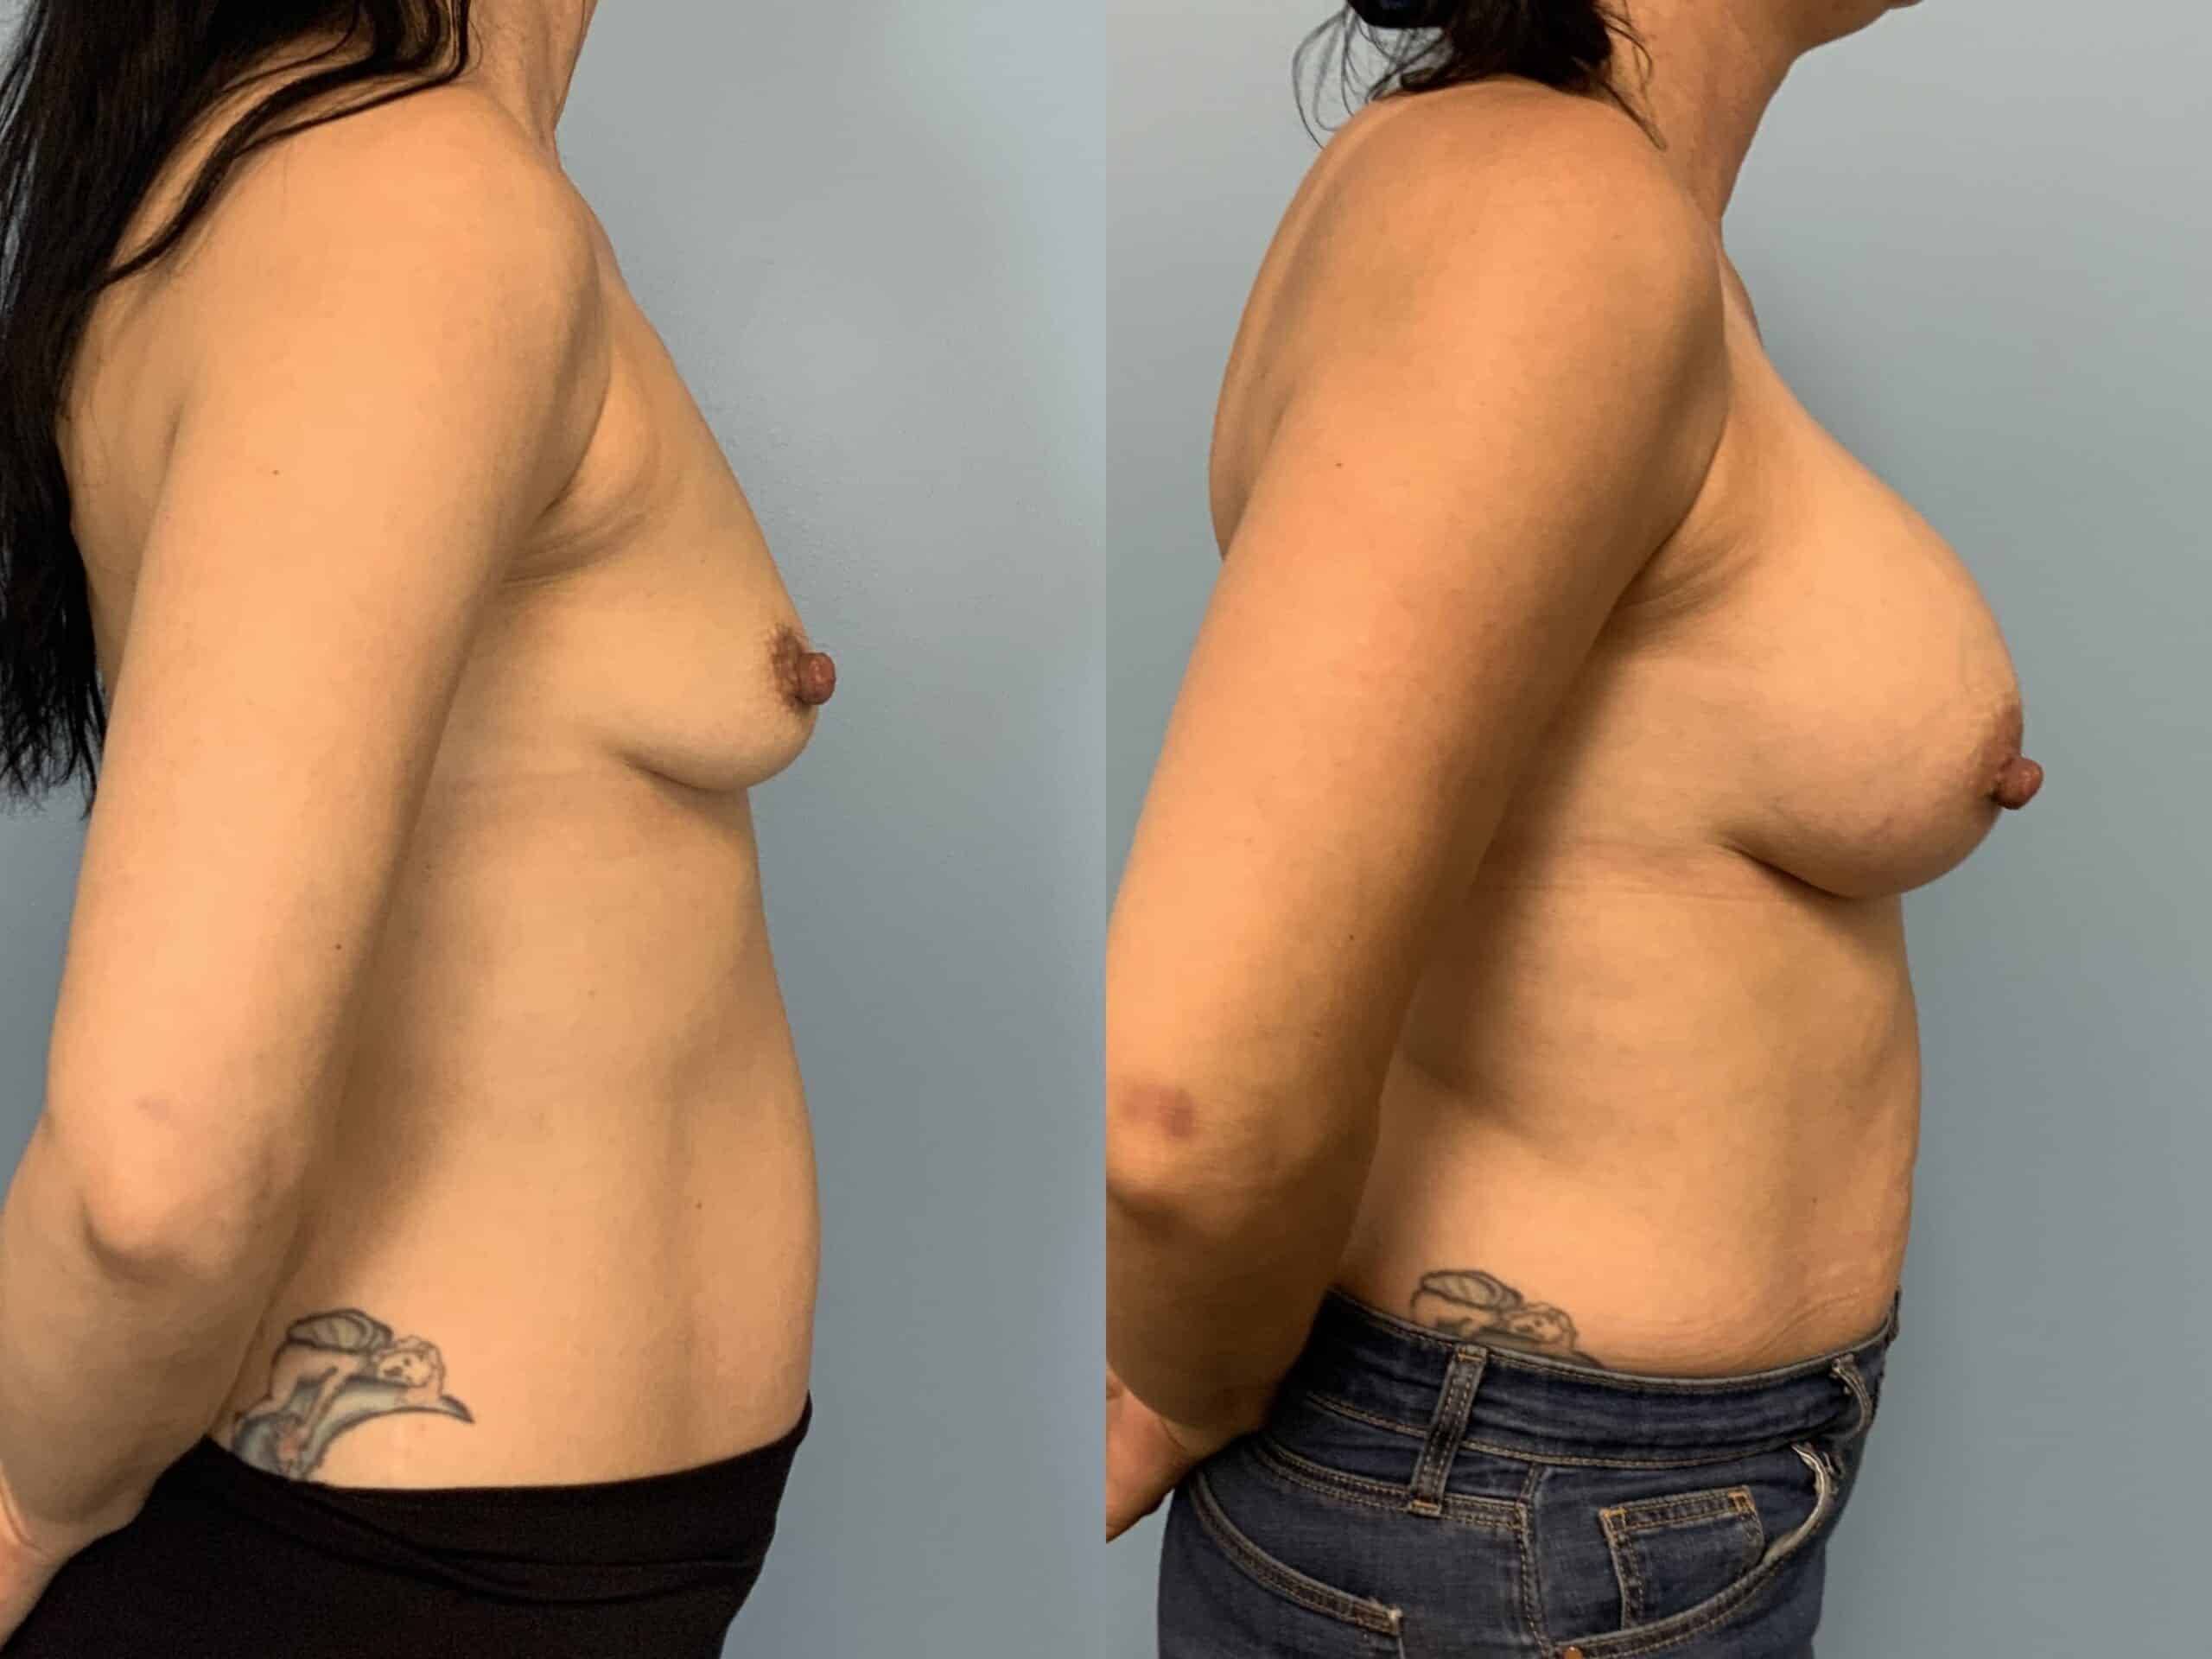 Before and after, Patient 2 mo post op from Breast Augmentation, Level III Muscle Release, Galaflex Reinforcement procedures performed by Dr. Paul Vanek